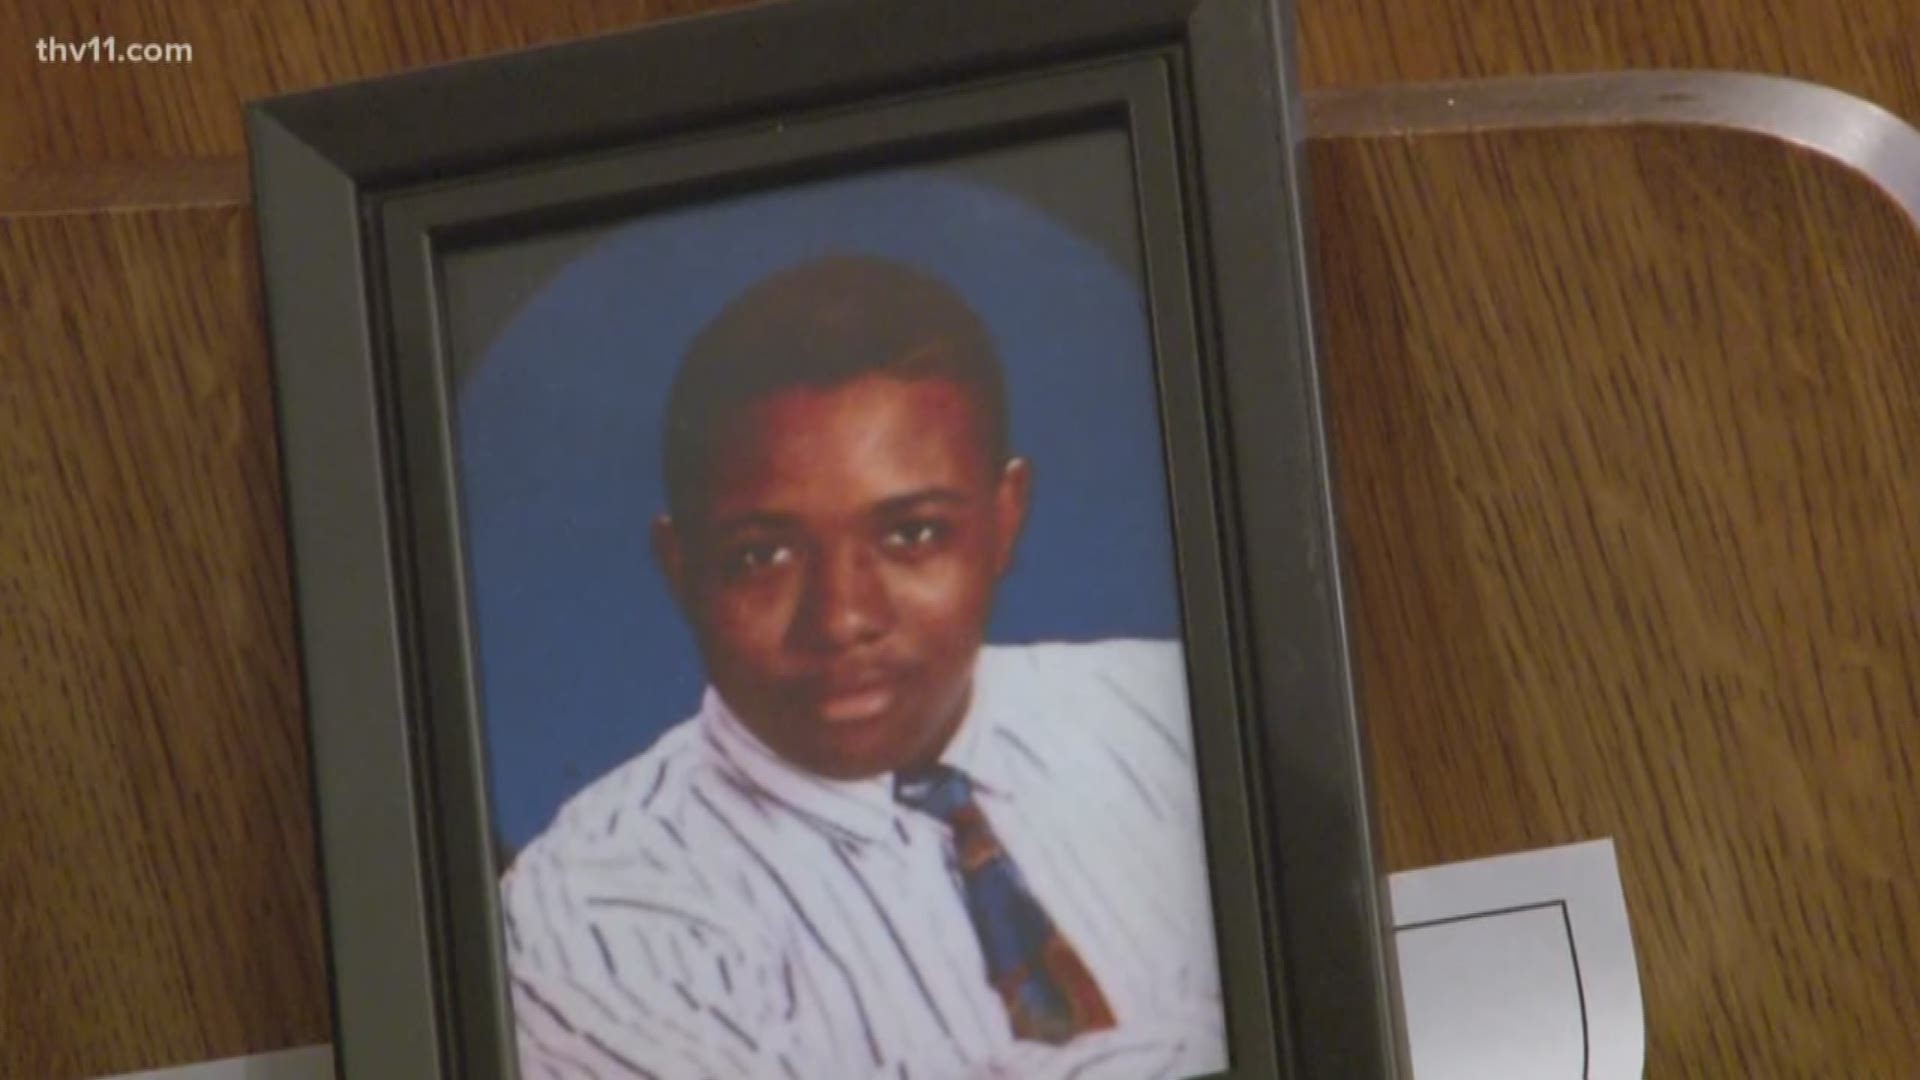 21 years later Pine Bluff reflects on tragic Easter homicide